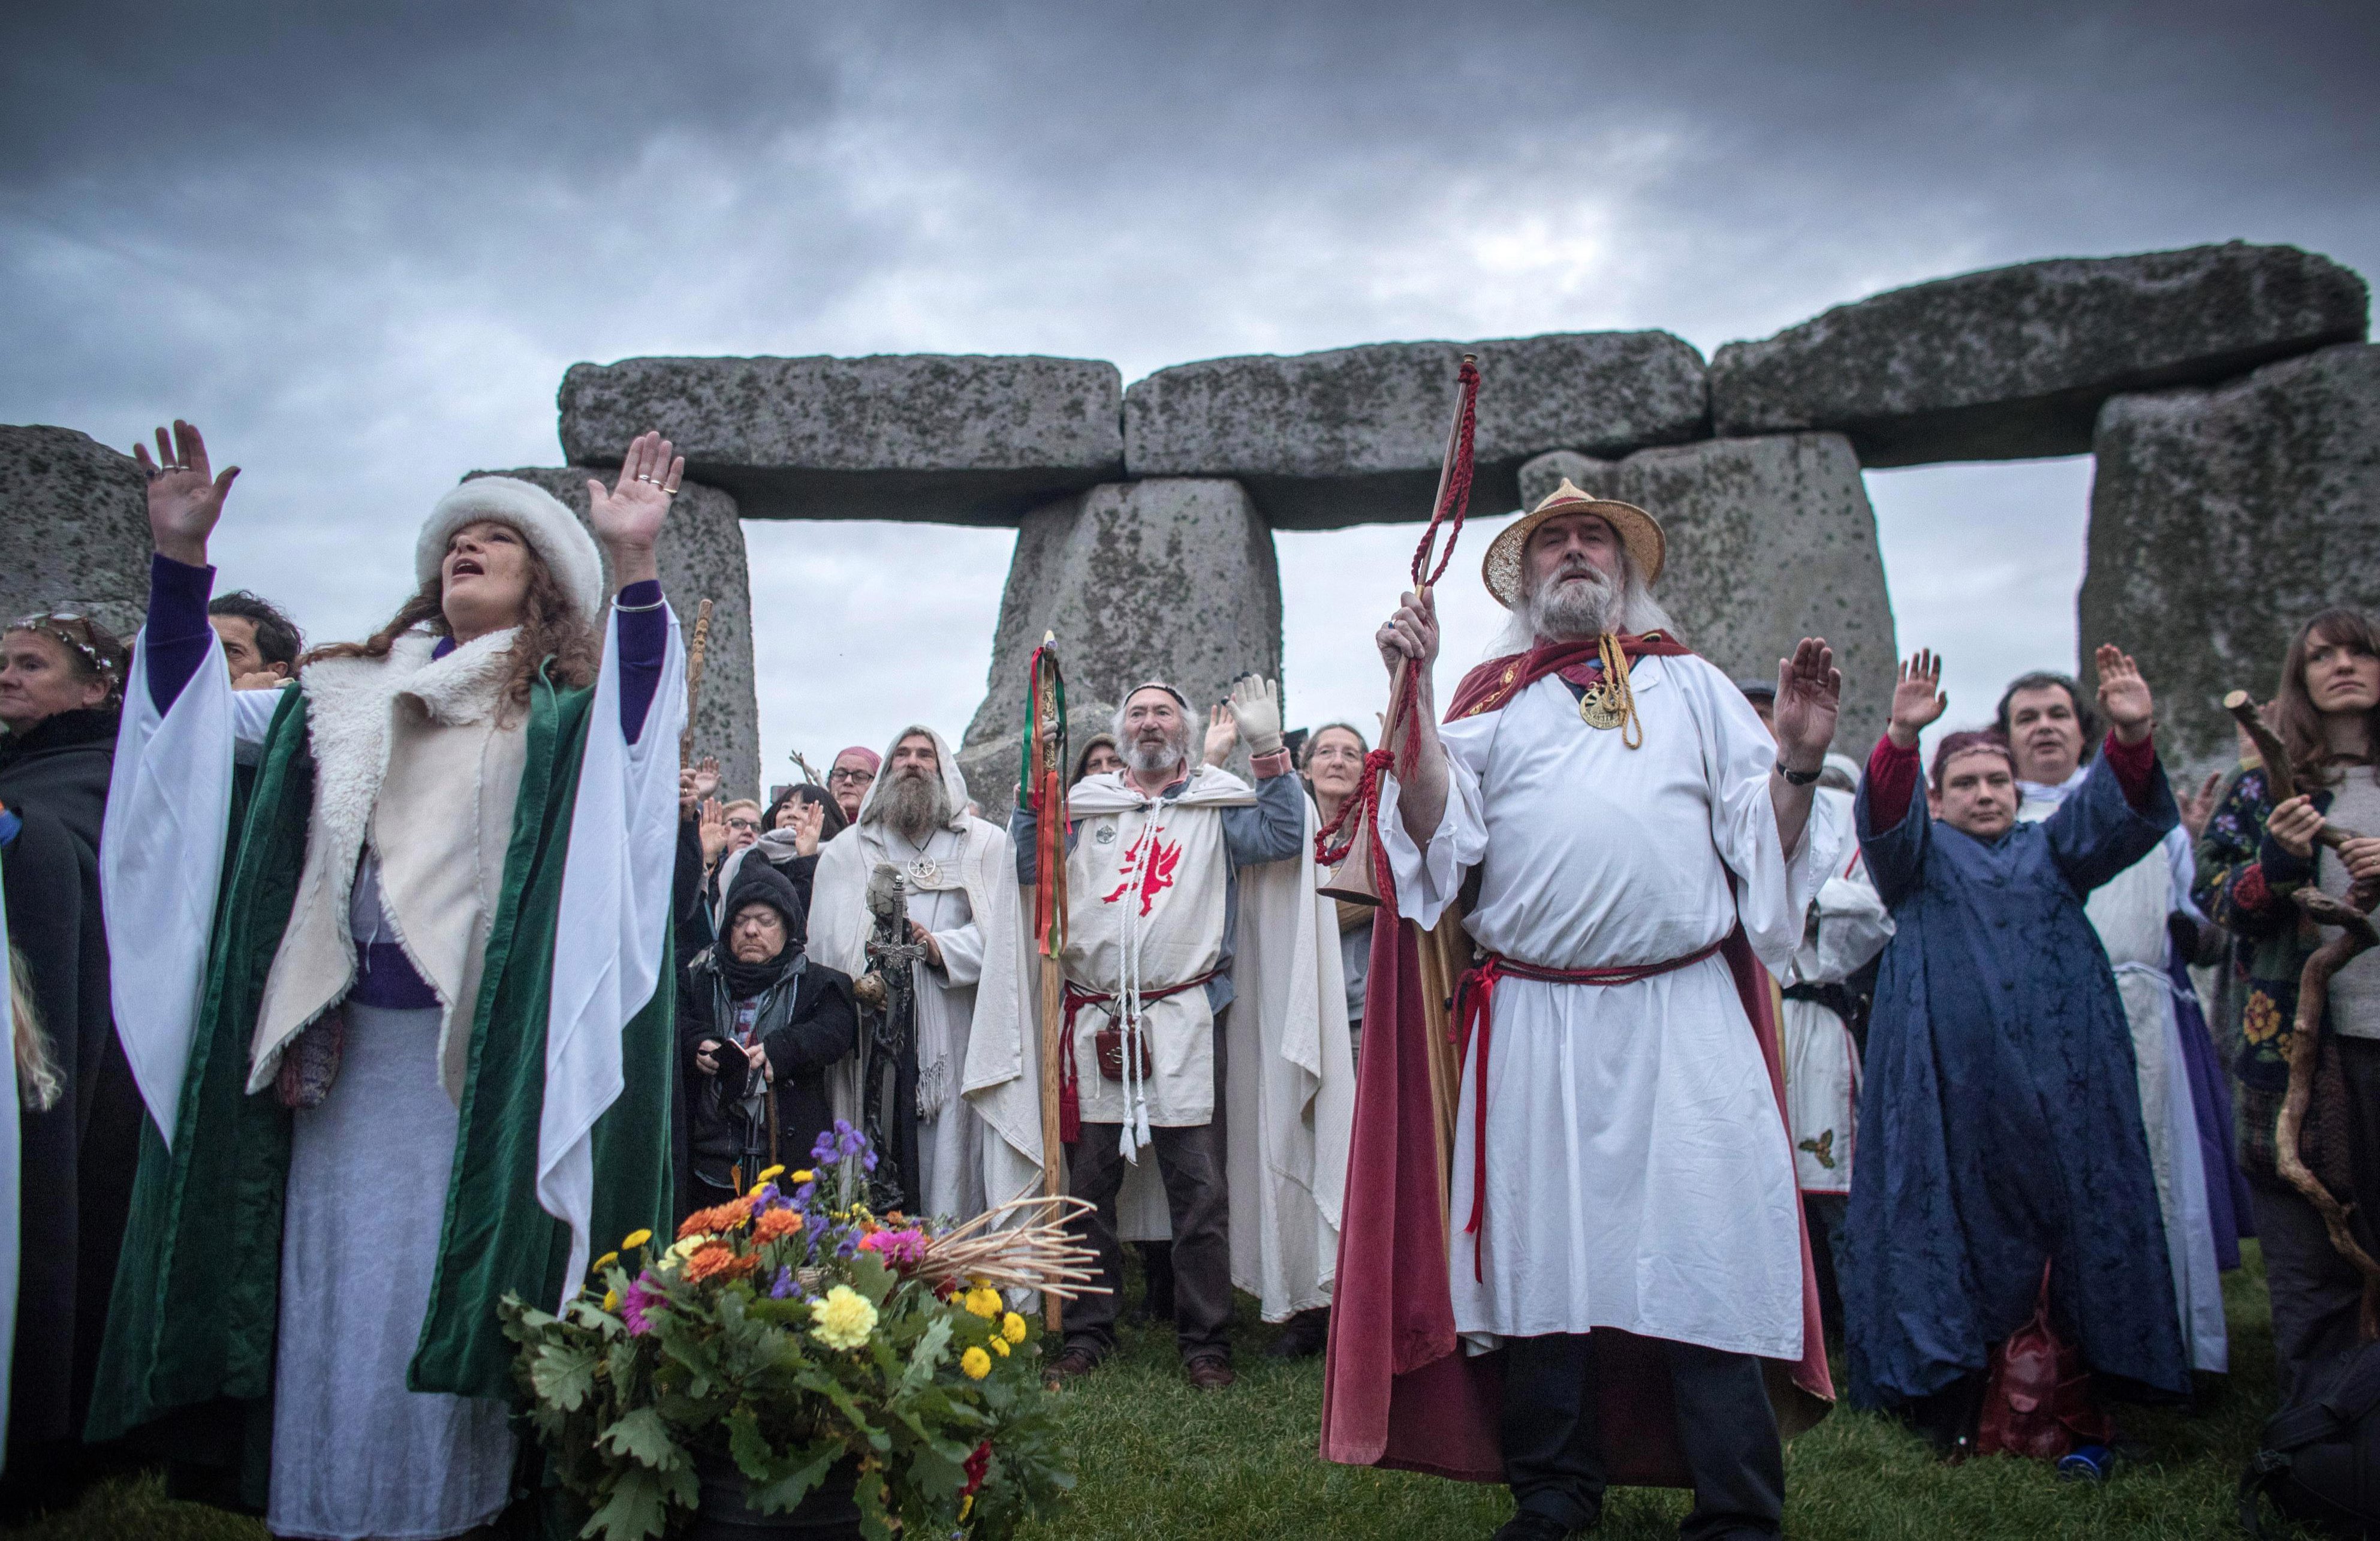  Druids are a diverse bunch, with different groups following their own practices and traditions